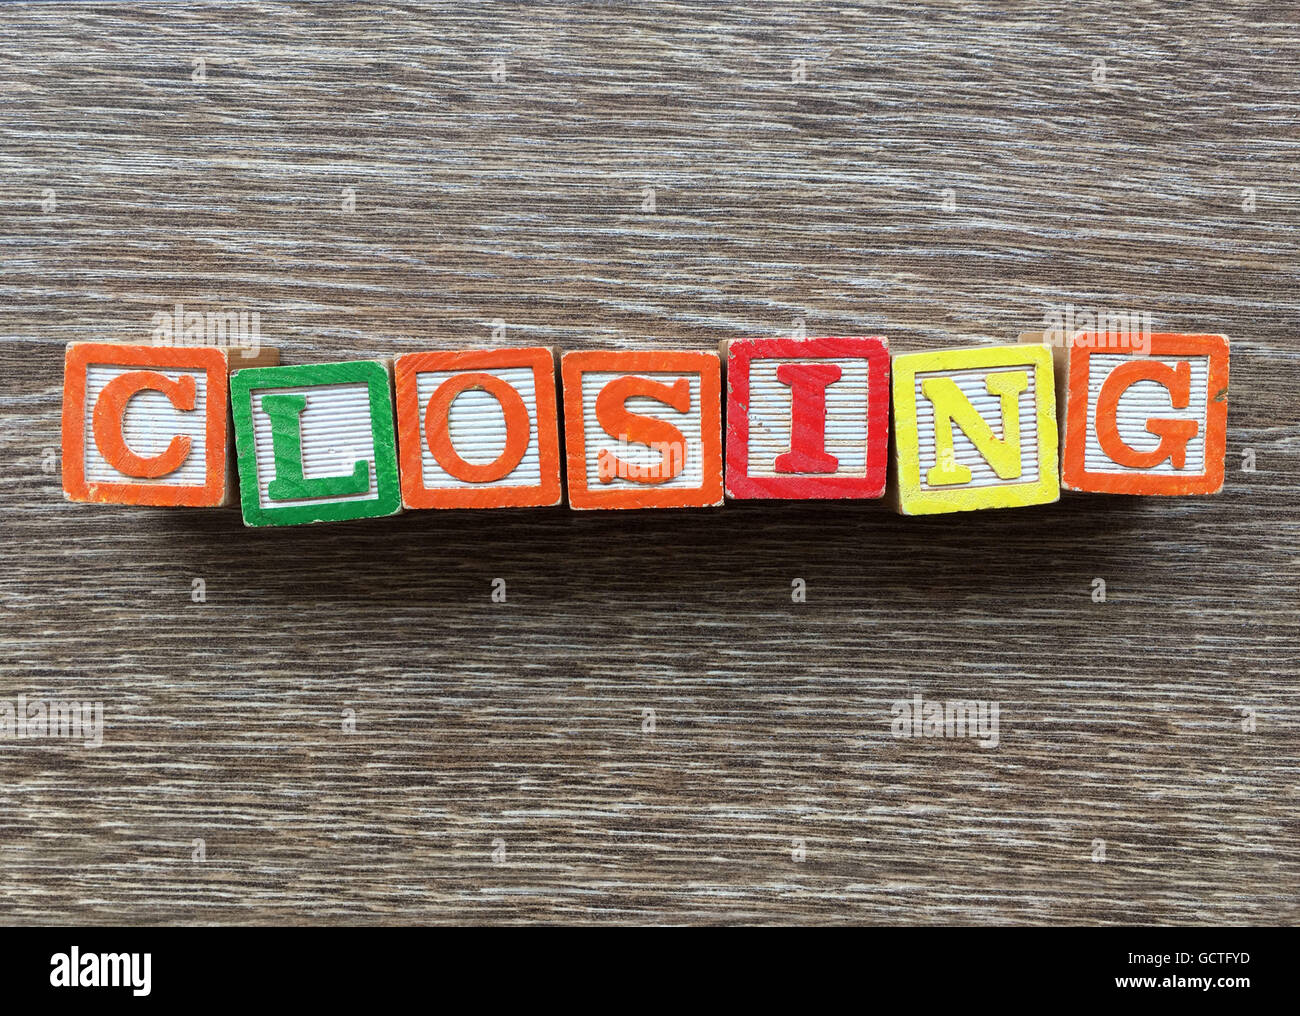 CLOSING word written with wood block letter toys Stock Photo